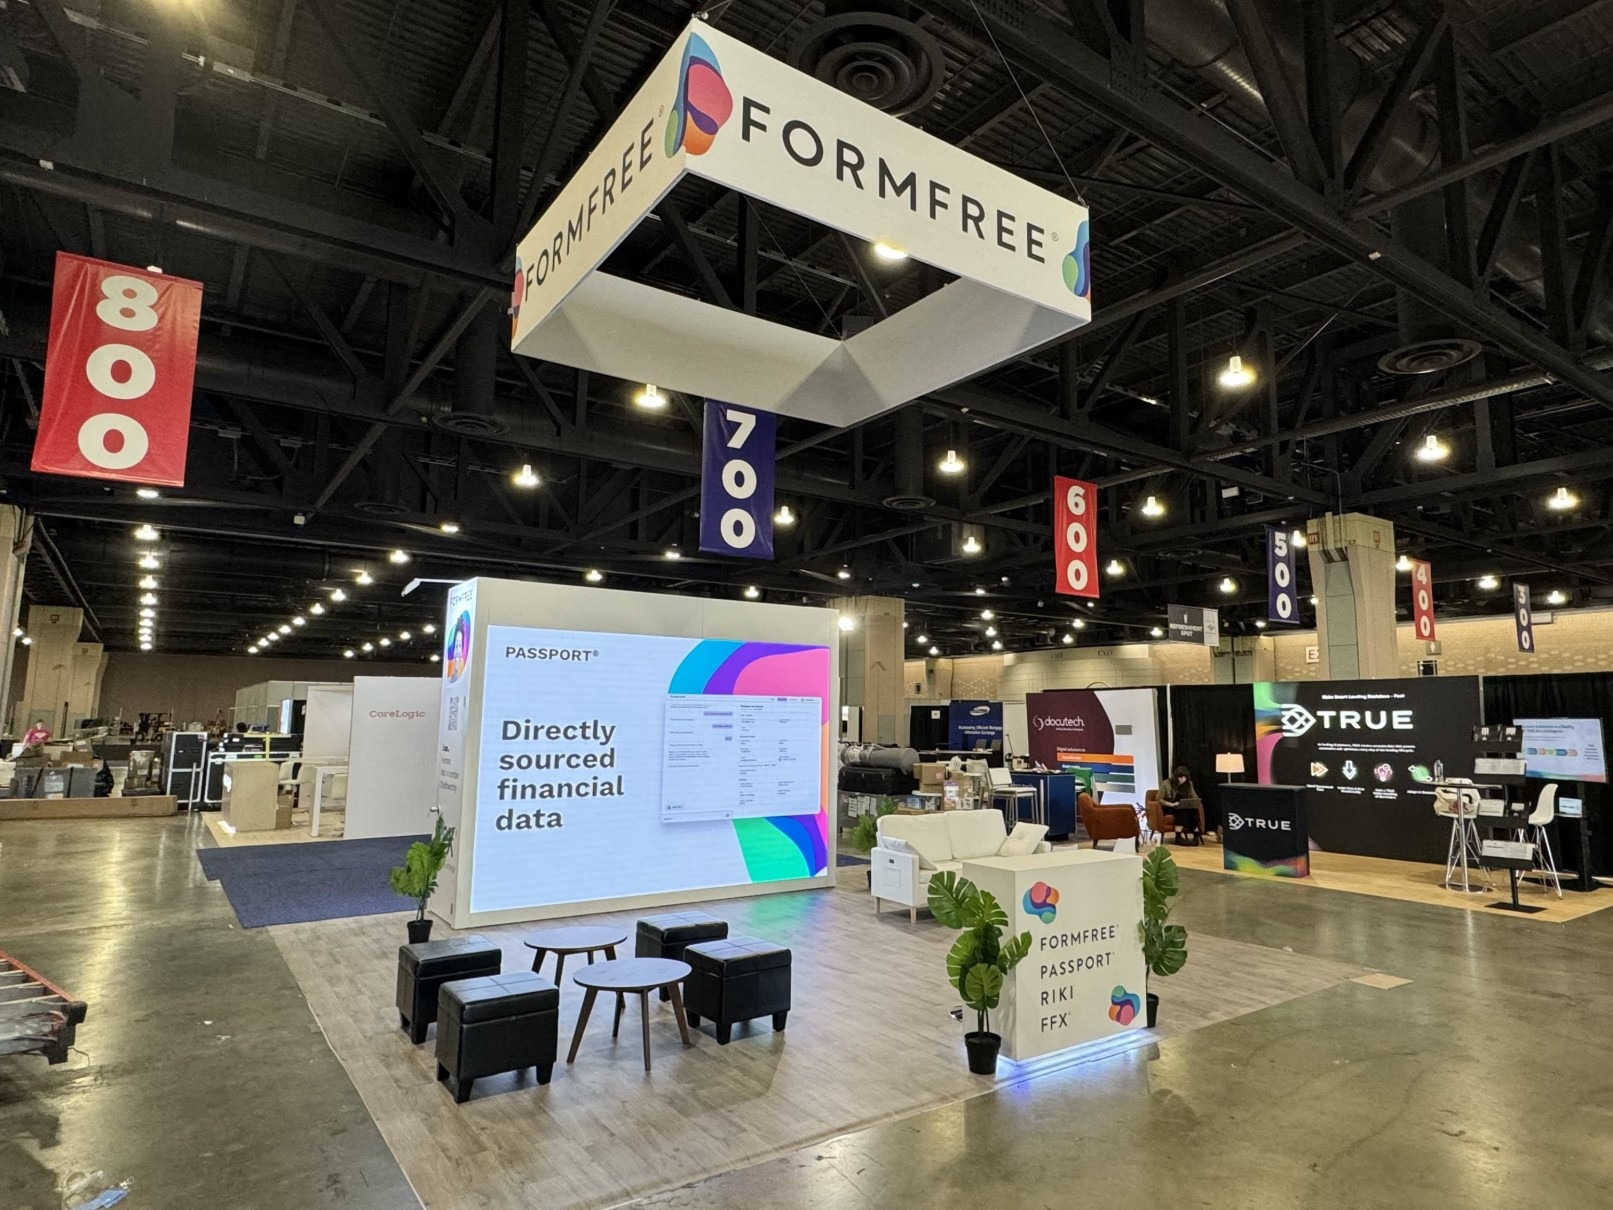 FormFree 20' x 20' MBA Conference Philadelphia LED Video Wall Booth